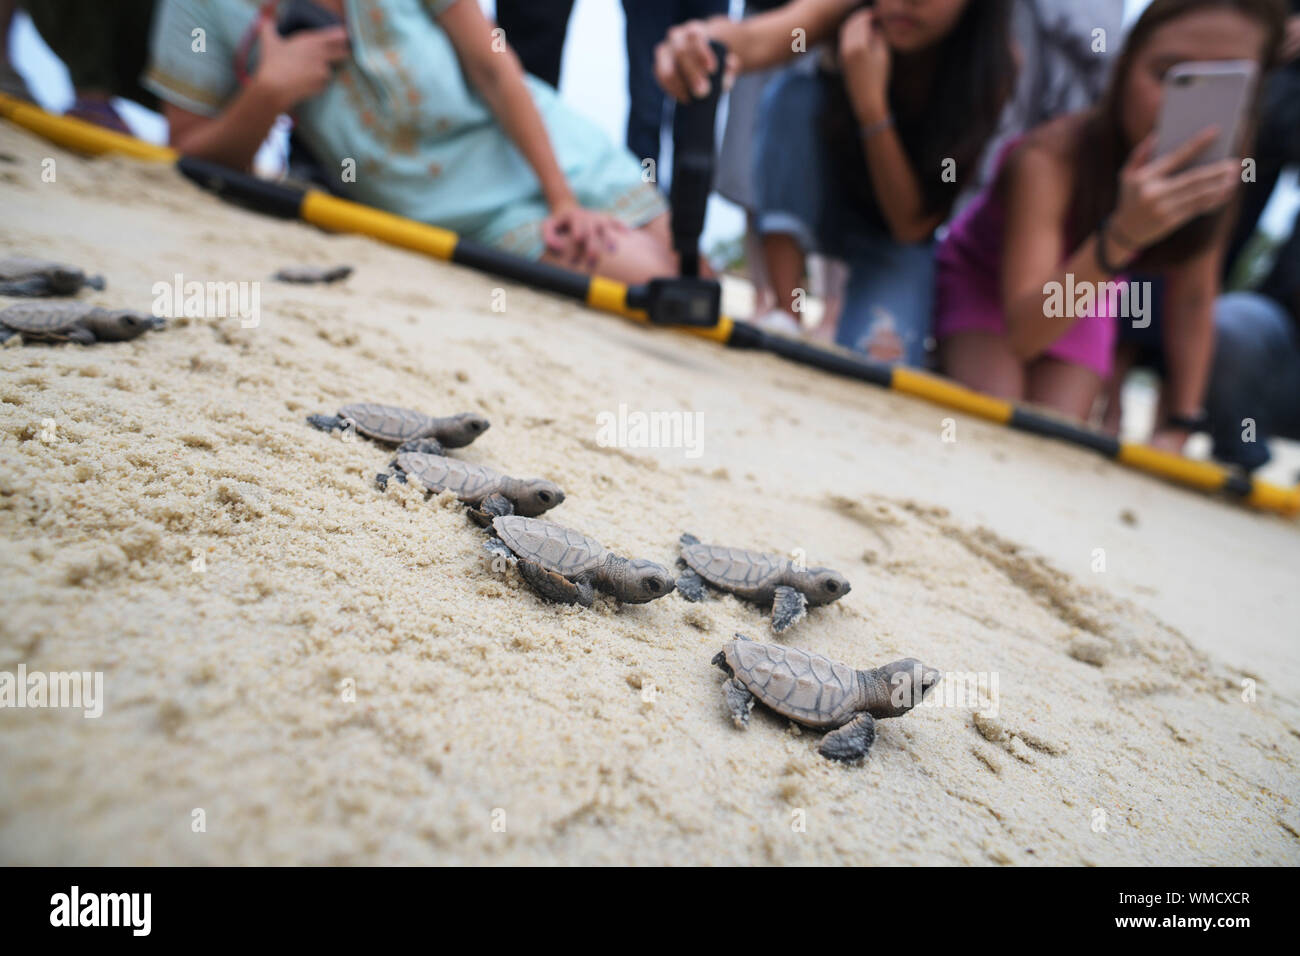 (190905) -- BEIJING, Sept. 5, 2019 (Xinhua) -- Hawksbill sea turtles hatched less than 10 hours ago make their way to the sea on the beach of Singapore's Sentosa Island on Sept. 4, 2019. Staff of the Sentosa Development Corporation released a total of 100 Hawksbill sea turtle hatchlings back to the sea. (Xinhua/Then Chih Wey) Stock Photo